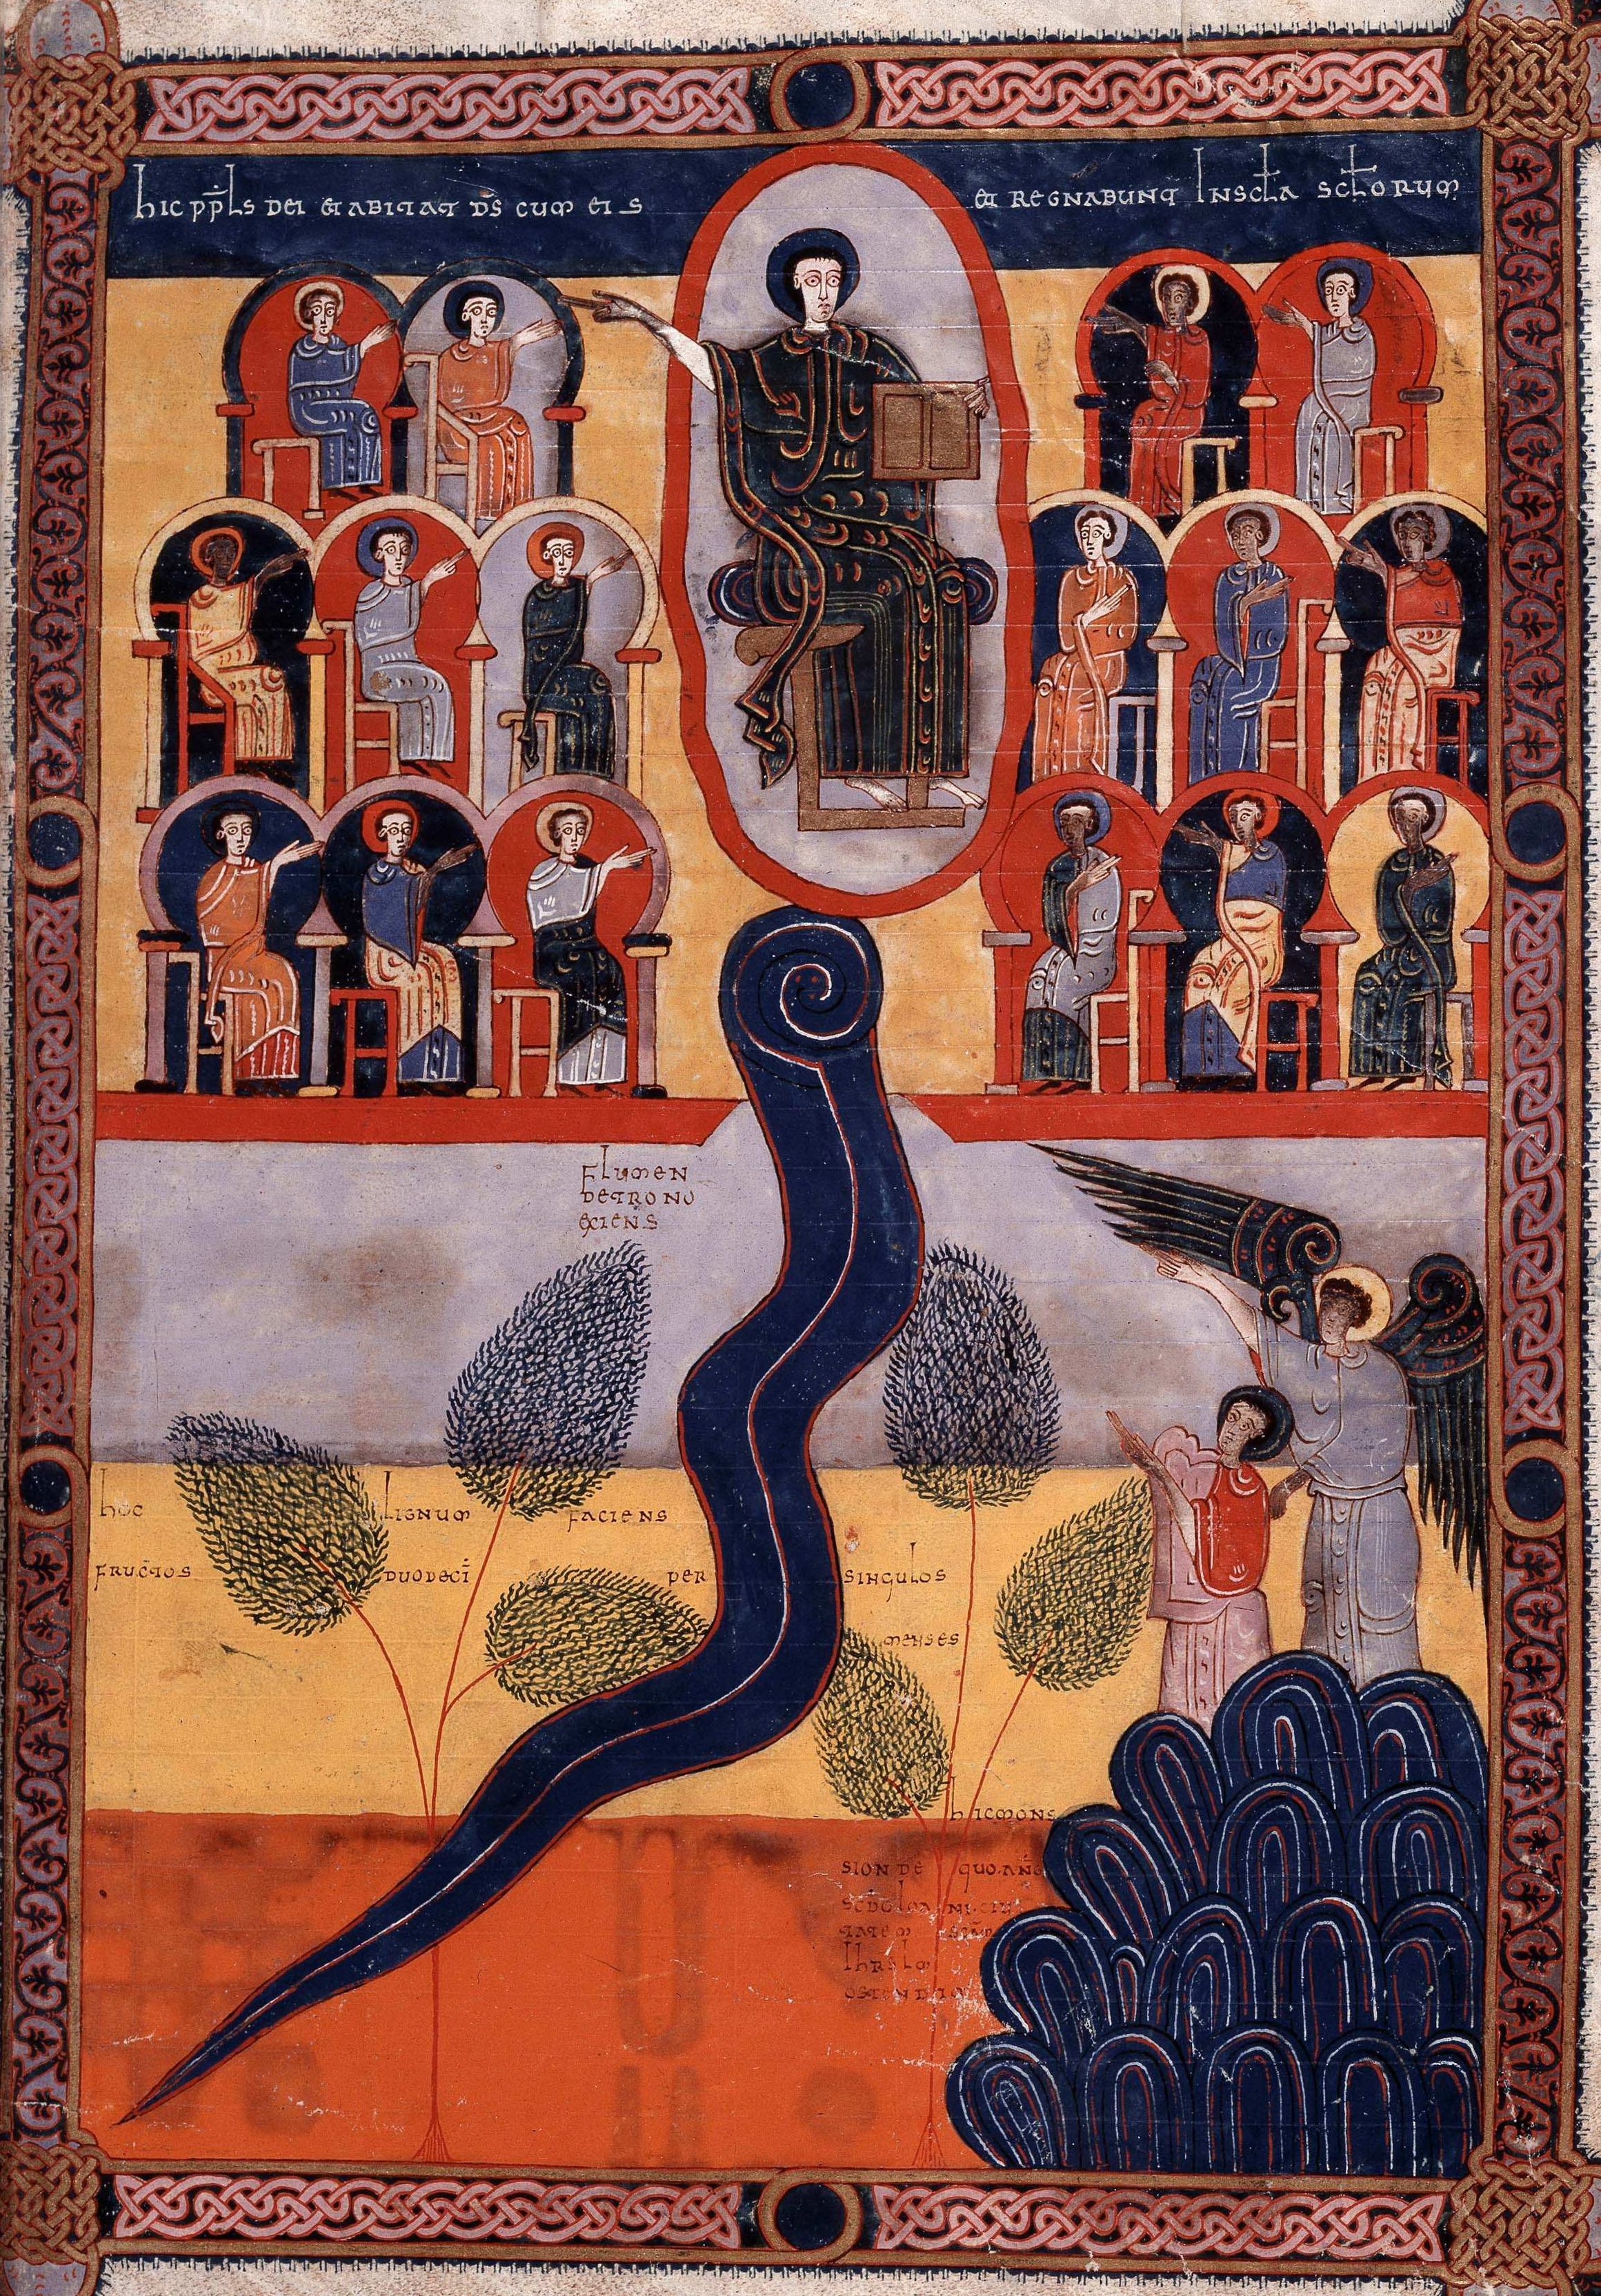 The New Jerusalem and the River of Life, Beatus de Facundus, 1047